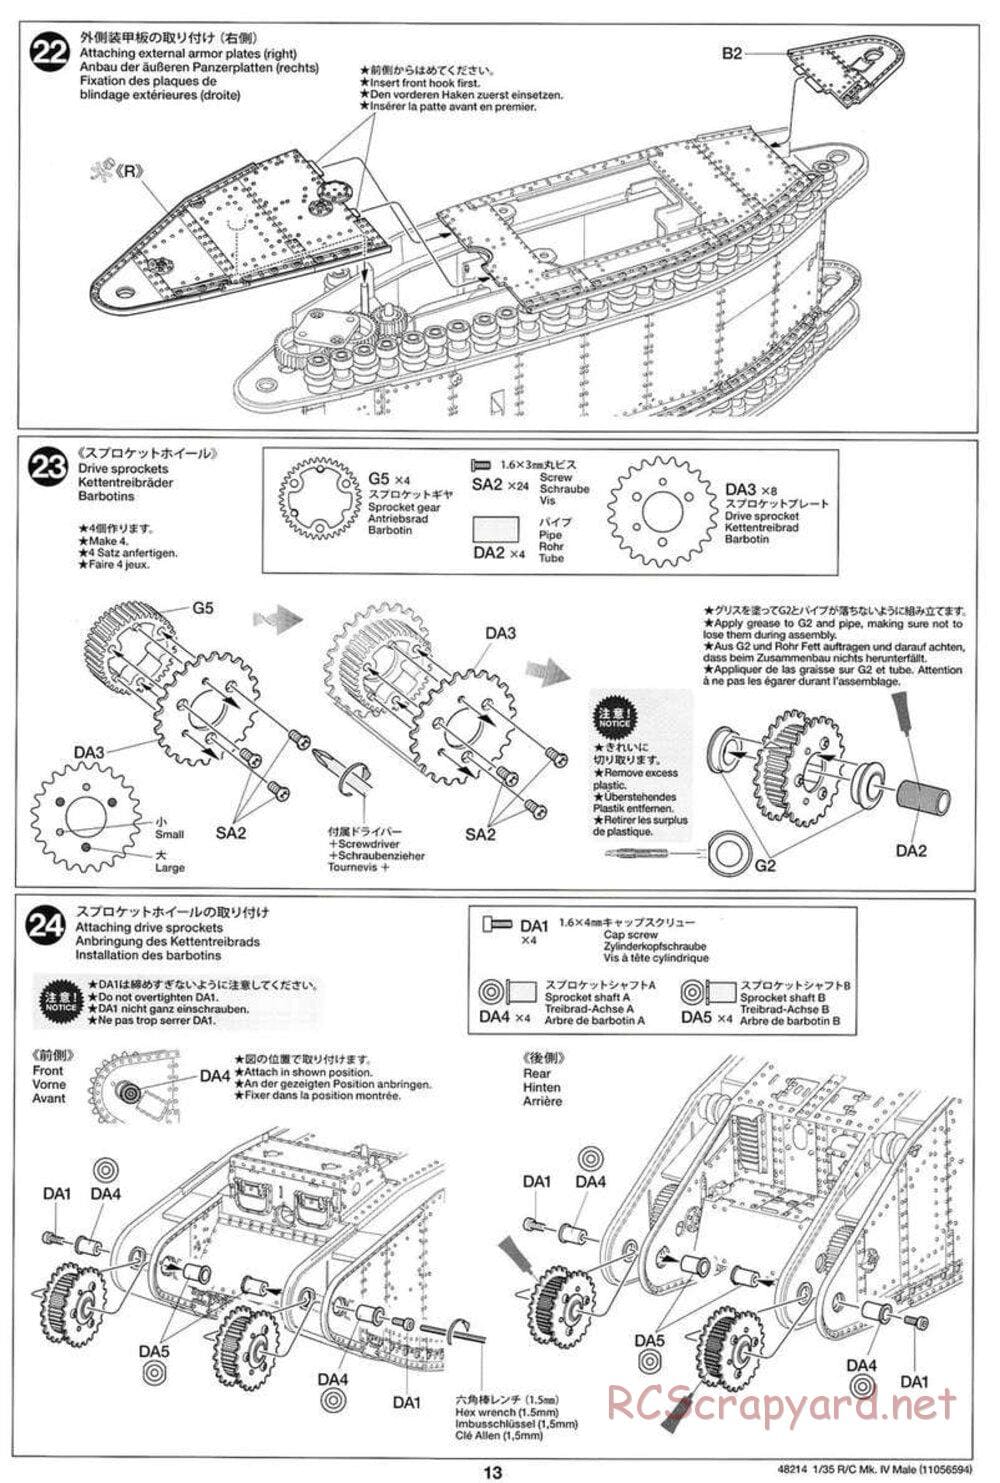 Tamiya - WWI British Tank Mark IV Male - 1/35 Scale Chassis - Manual - Page 13